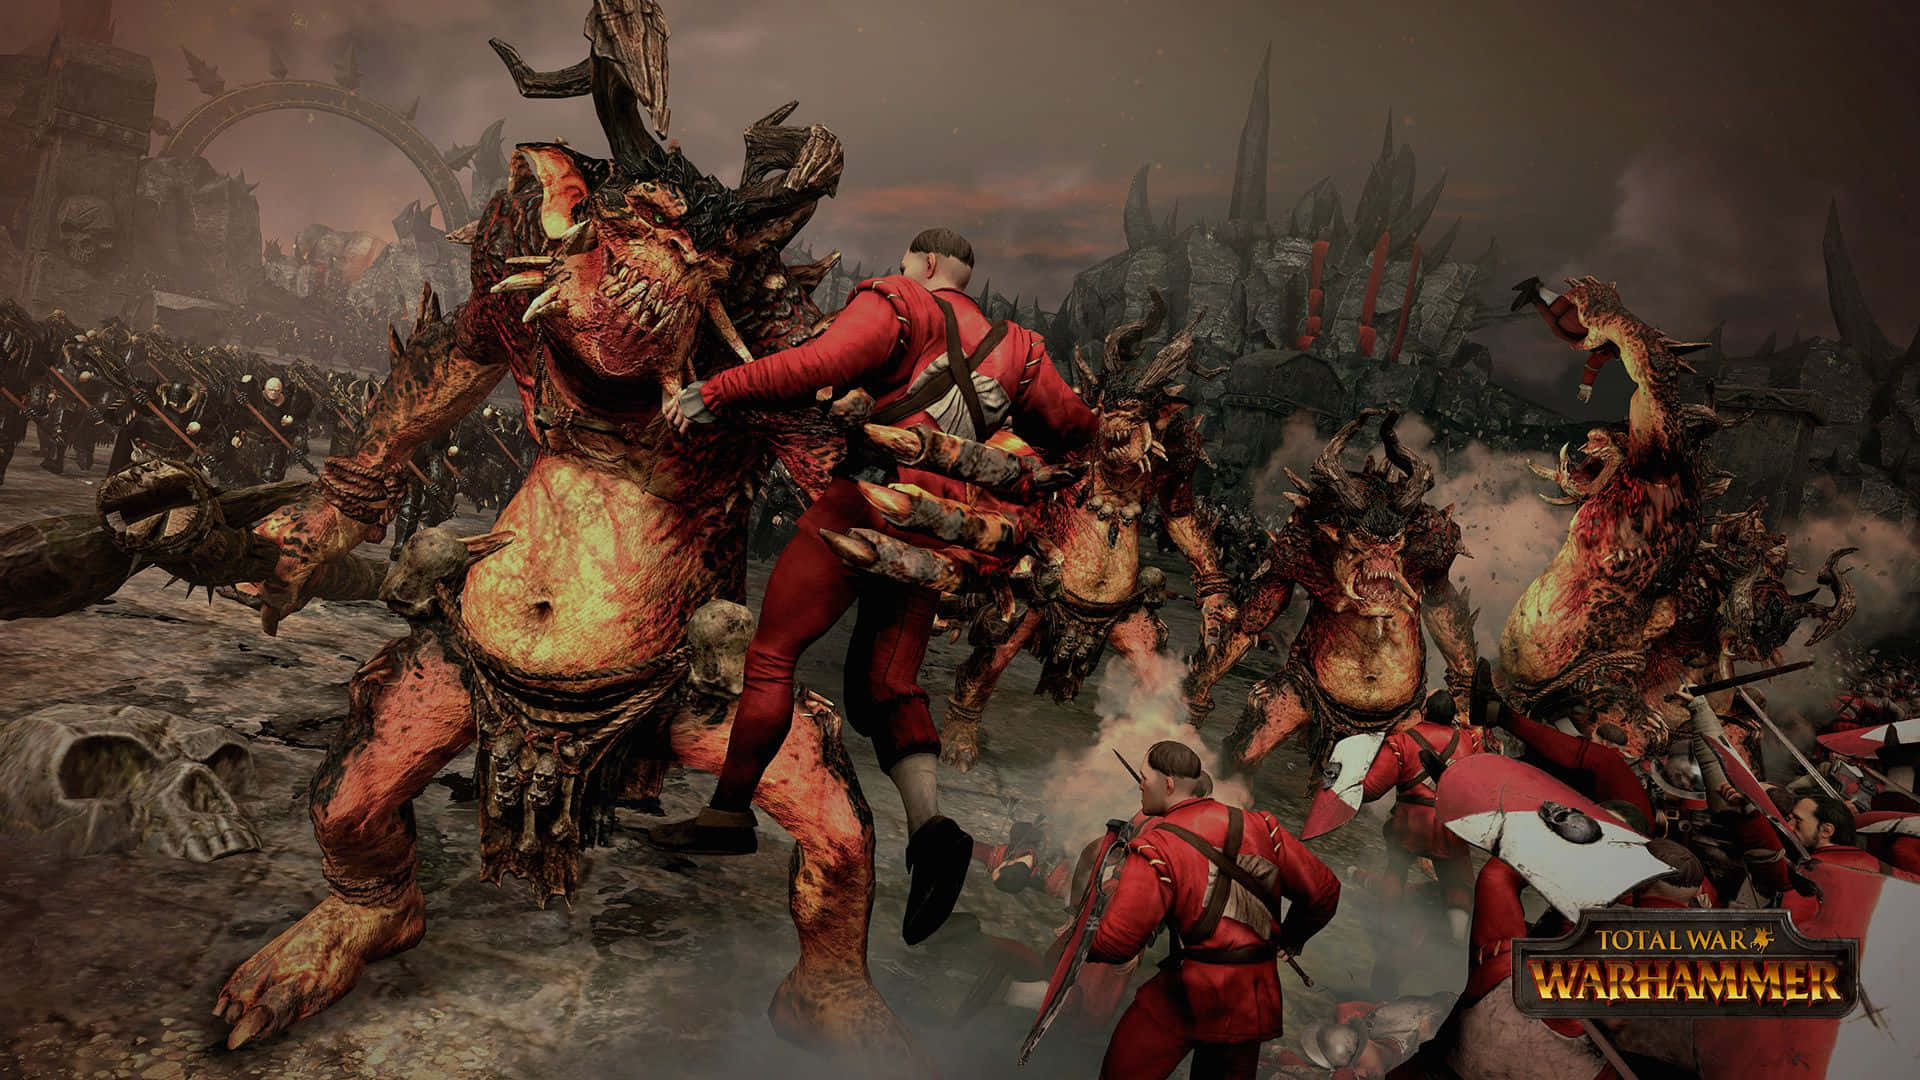 Explore the epically-scaled battles and complex world of Total War: Warhammer